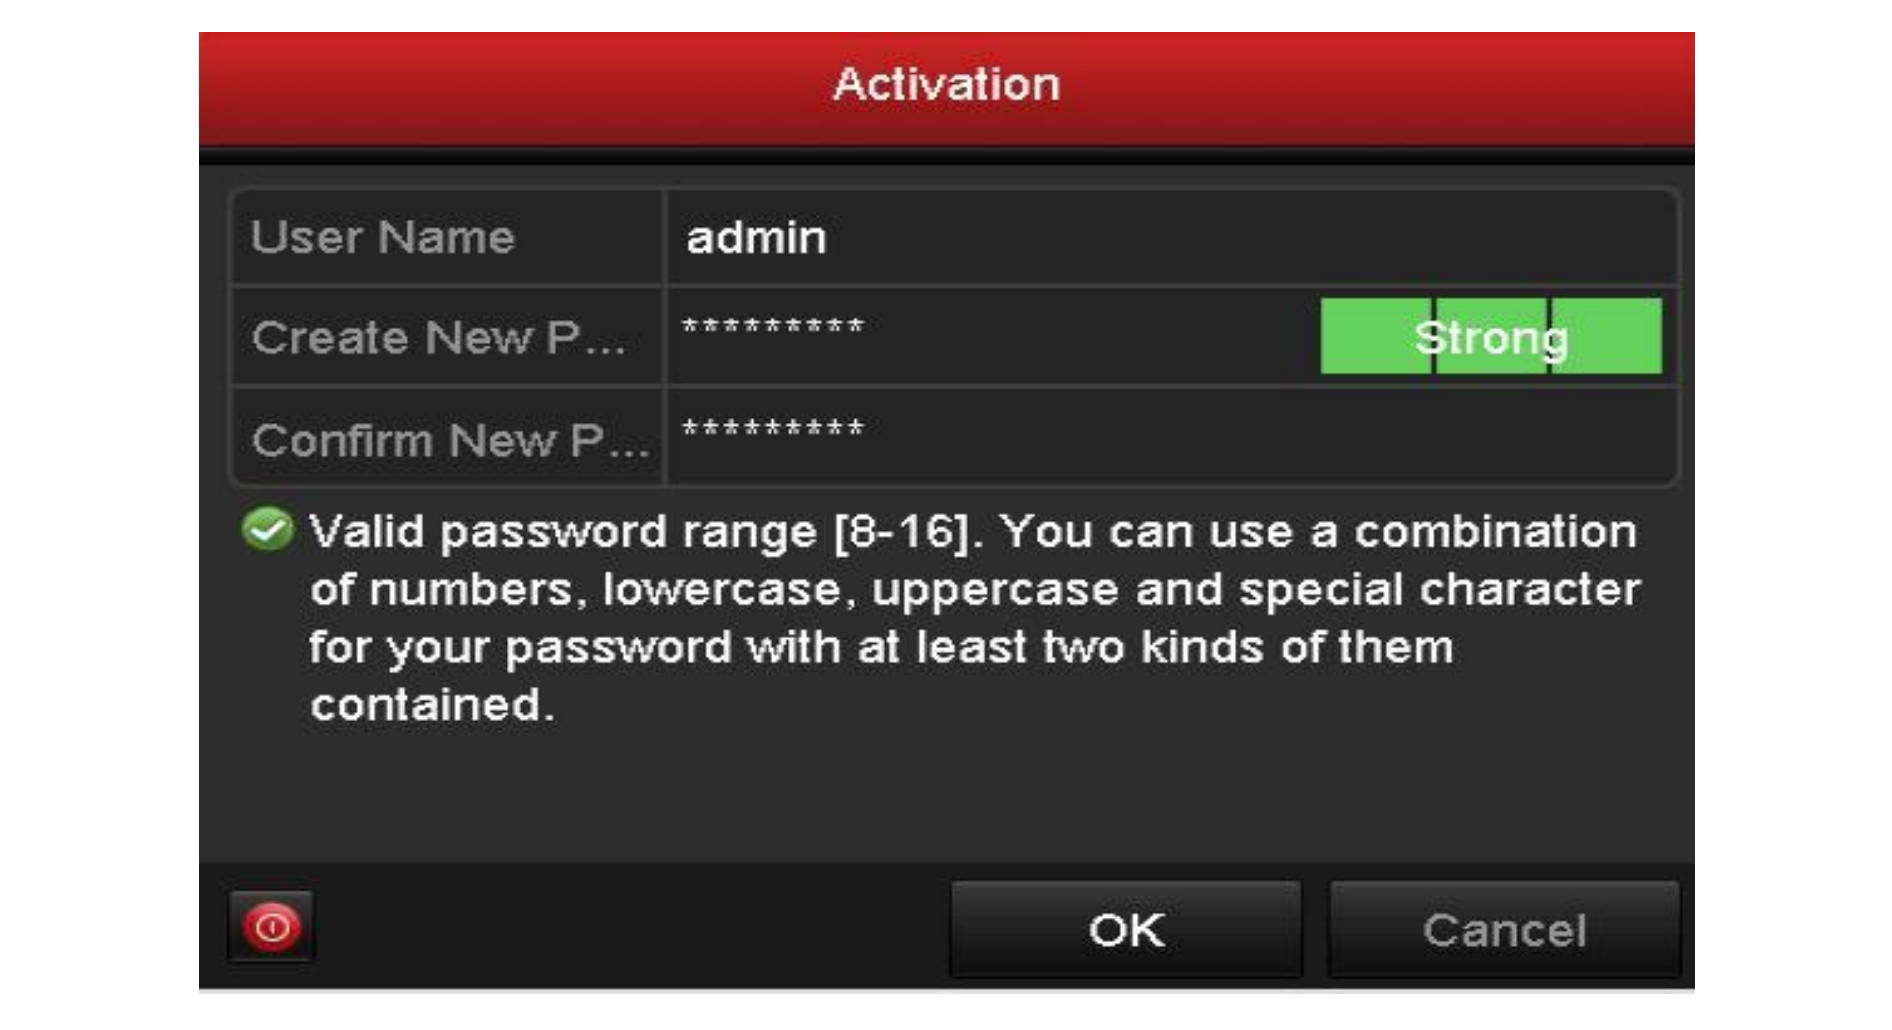 How to Reset Password for SADP - Hikvision